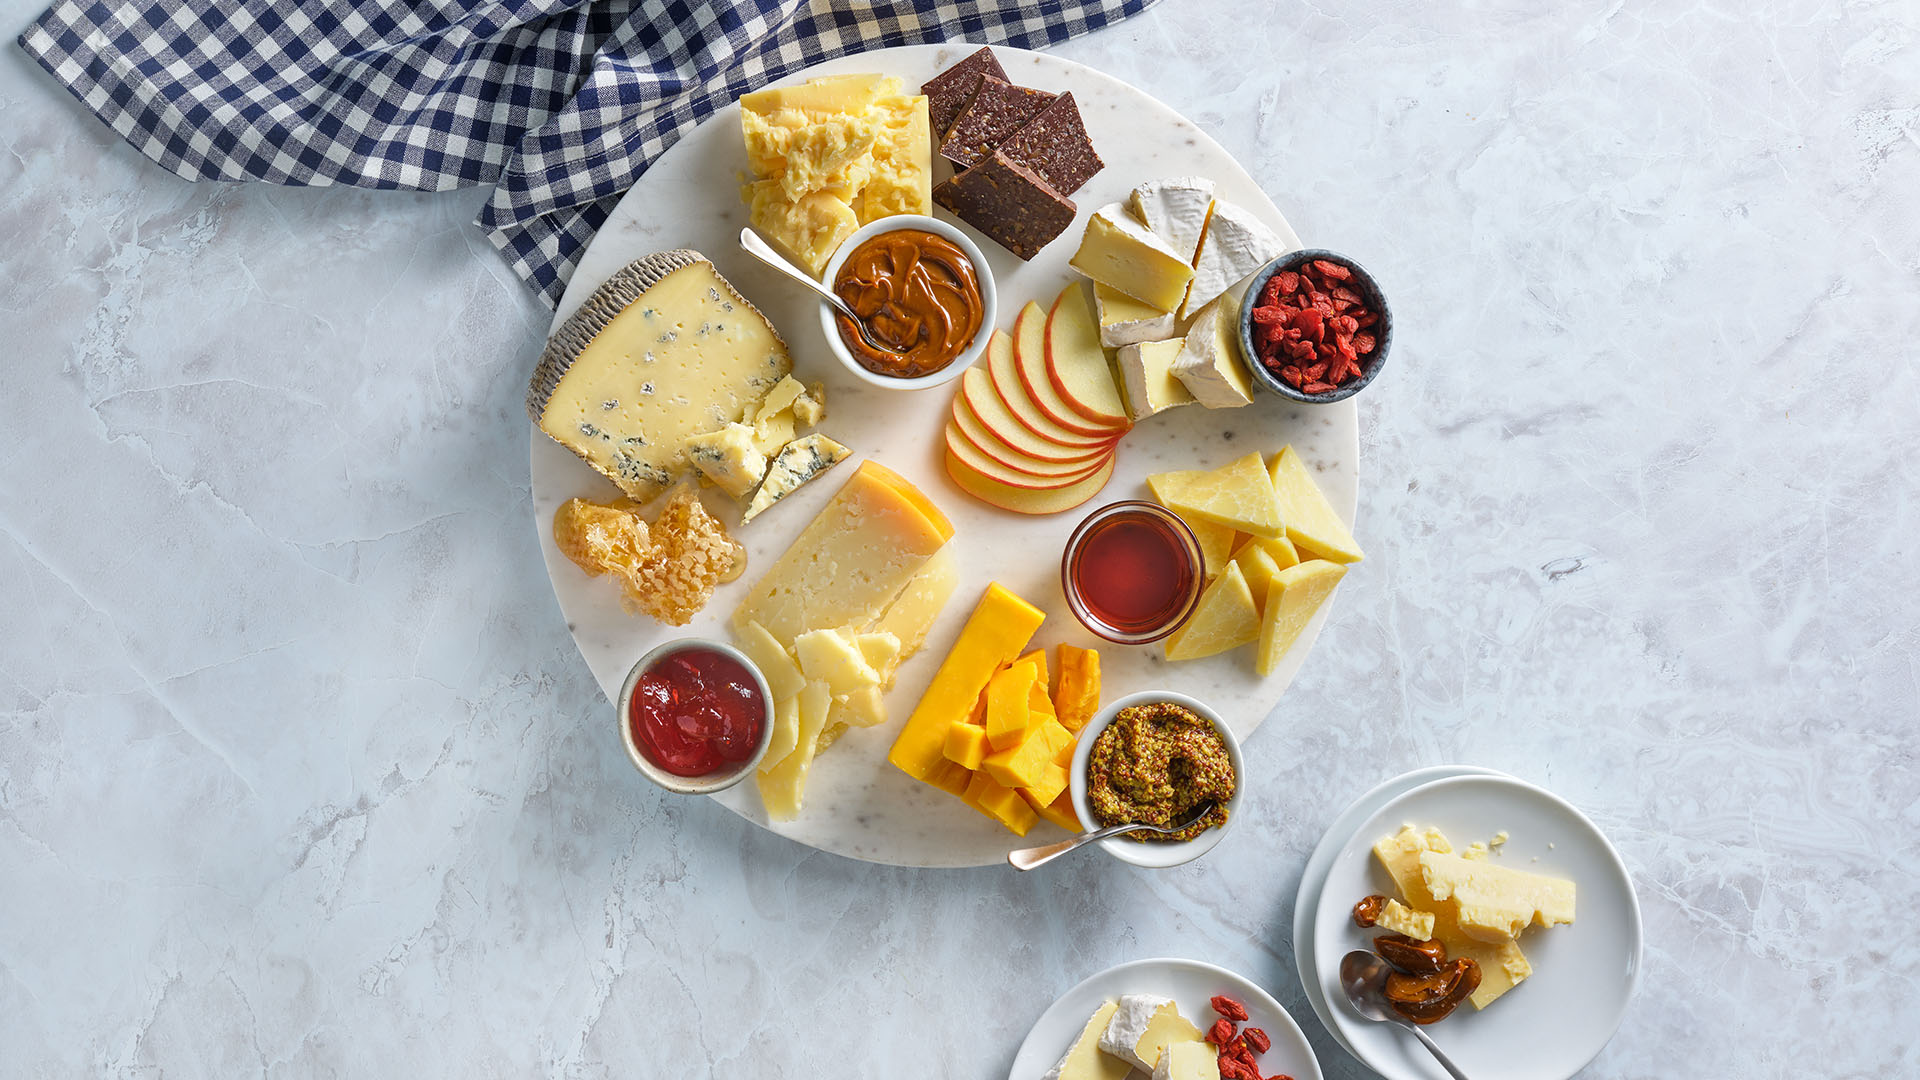 Overhead view of a round, white marble serving board with an assortment of cheese, fruit, and condiments for a charcuterie board next to a black and white checkered napkin.